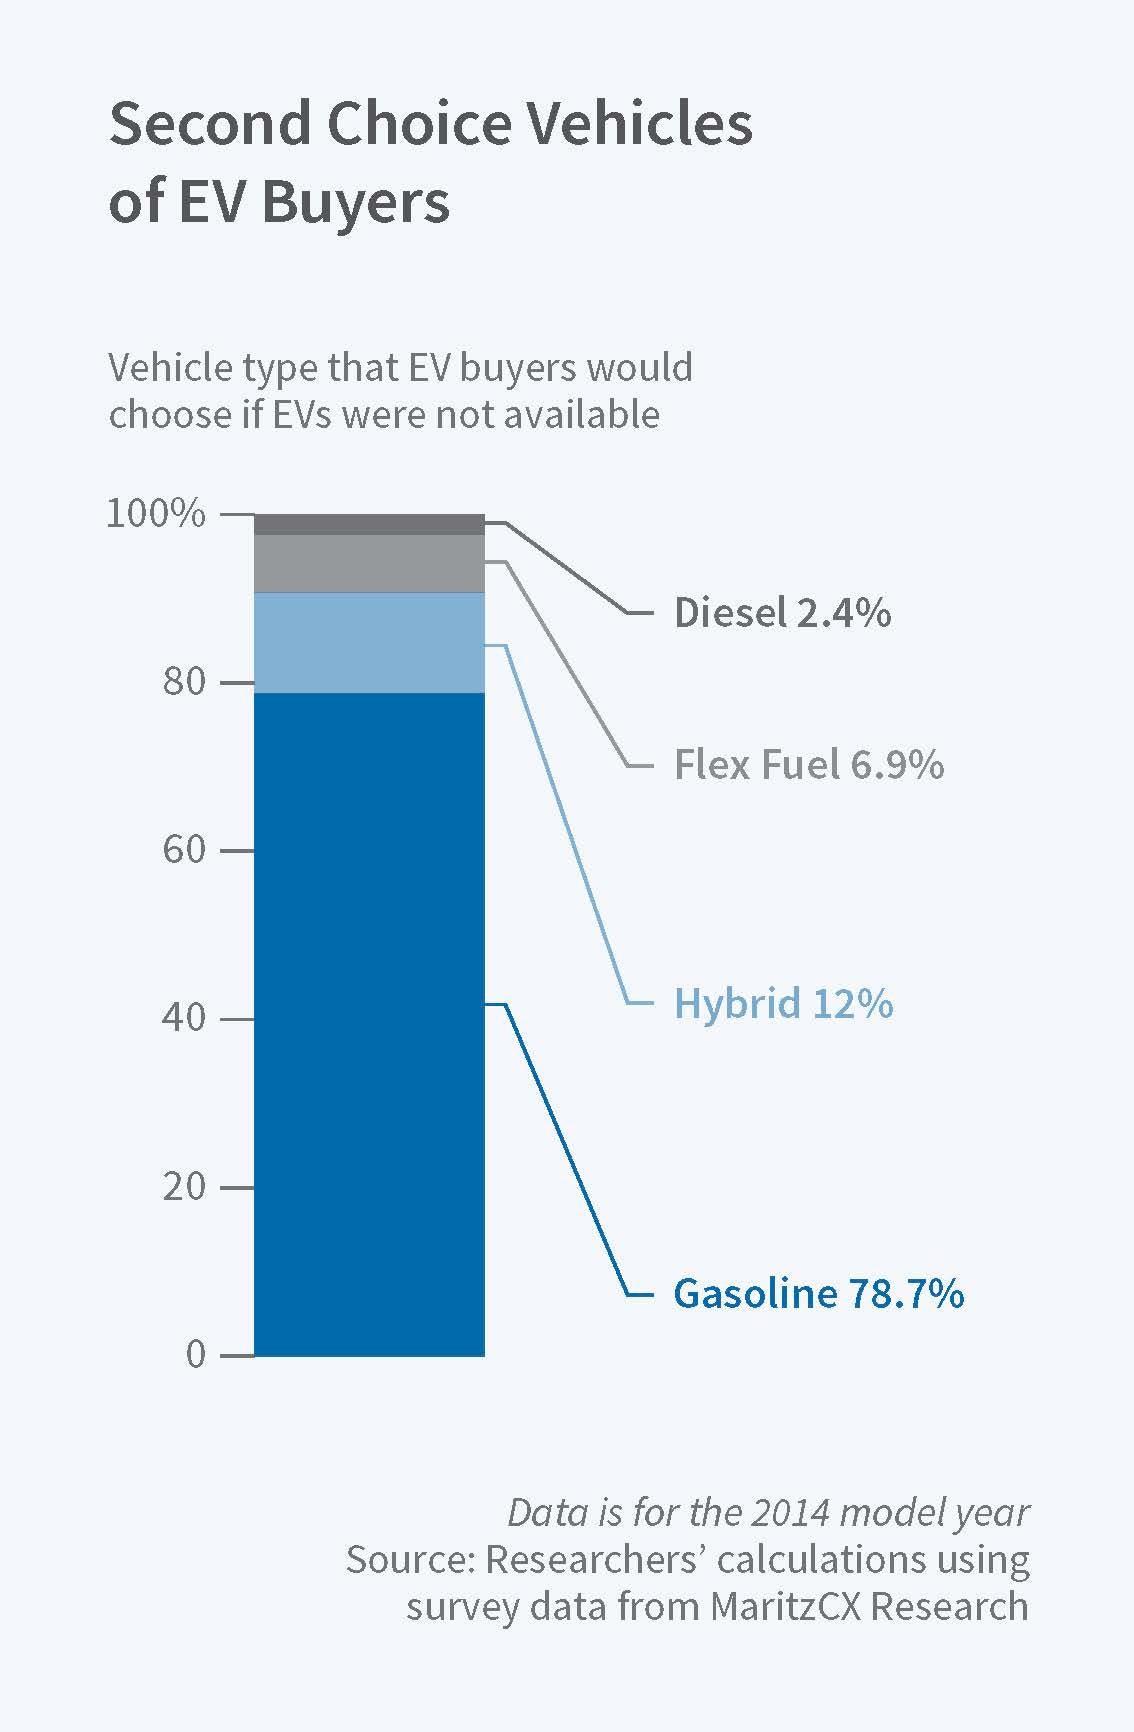 Alternative Fuels Data Center: How Do All-Electric Cars Work?